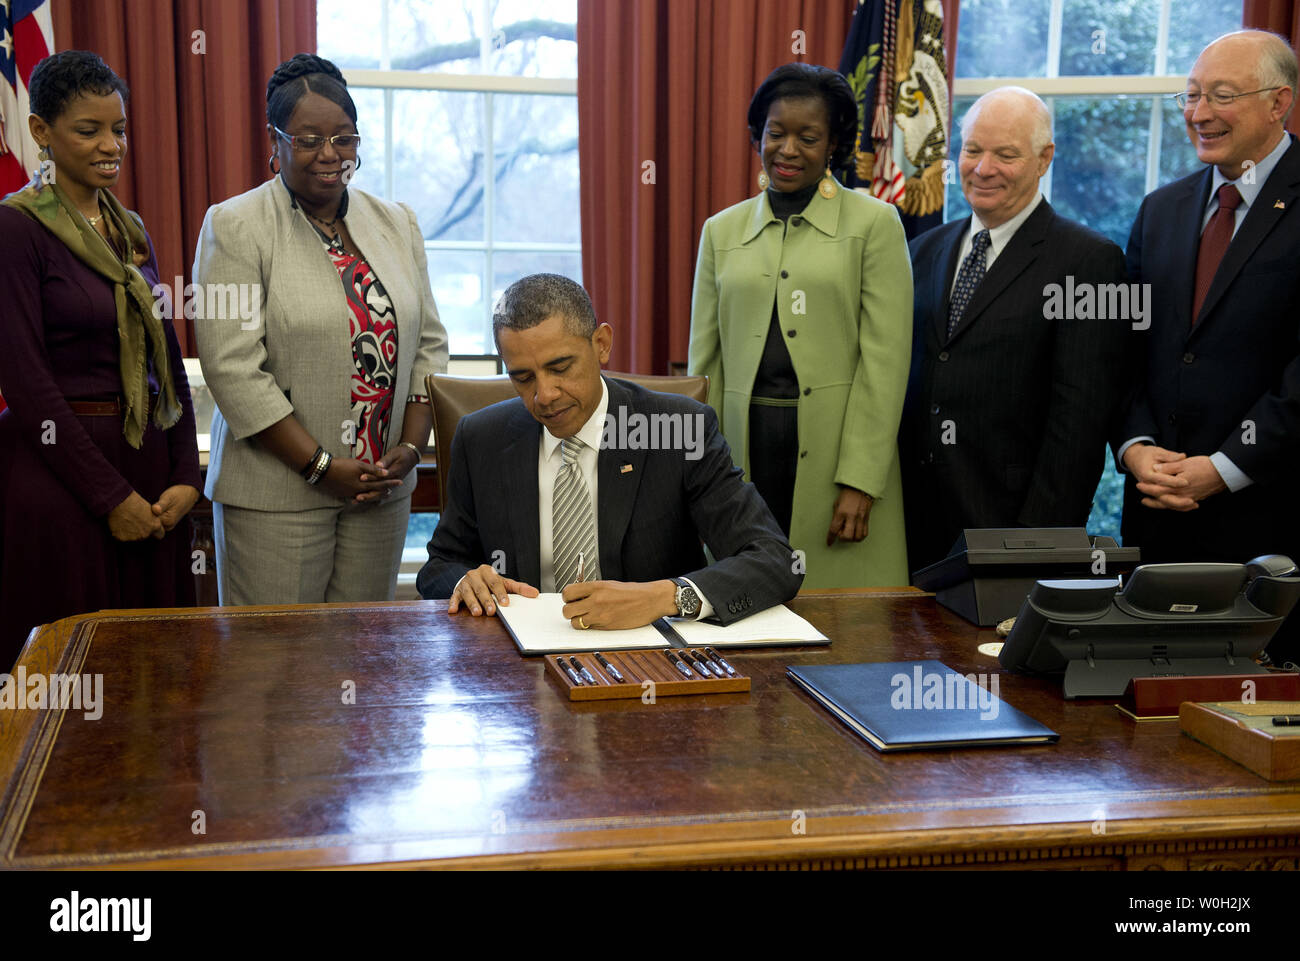 President Barack Obama signs a bill designating the Harriet Tubman Underground Railroad, in Maryland, a National Monument during a bill signing ceremony in the Oval Office at the White House on March 25, 2013 in Washington, D.C. President Obama signed a series of bills designating five new National Monuments, including, Rio Grande del Norte, in New Mexico, the First State Monument in Delaware, the Harriet Tubman Underground Railroad in Maryland, the Charles Young Buffalo Soldiers in Ohio and the San Juan Islands in Washington. UPI/Kevin Dietsch Stock Photo